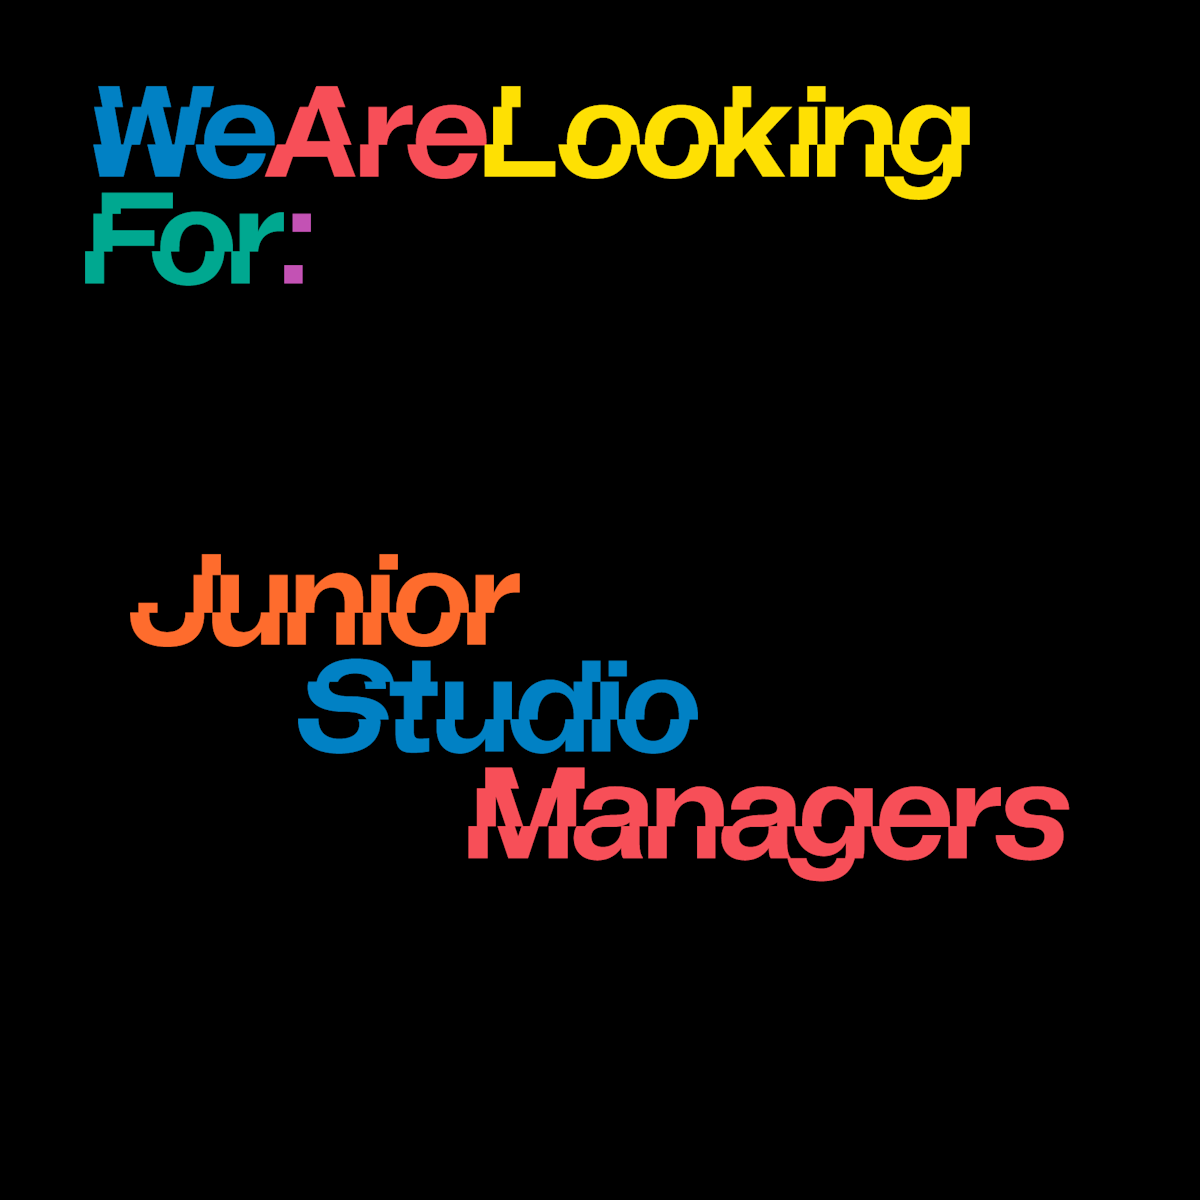 We are looking for Junior Studio Managers!